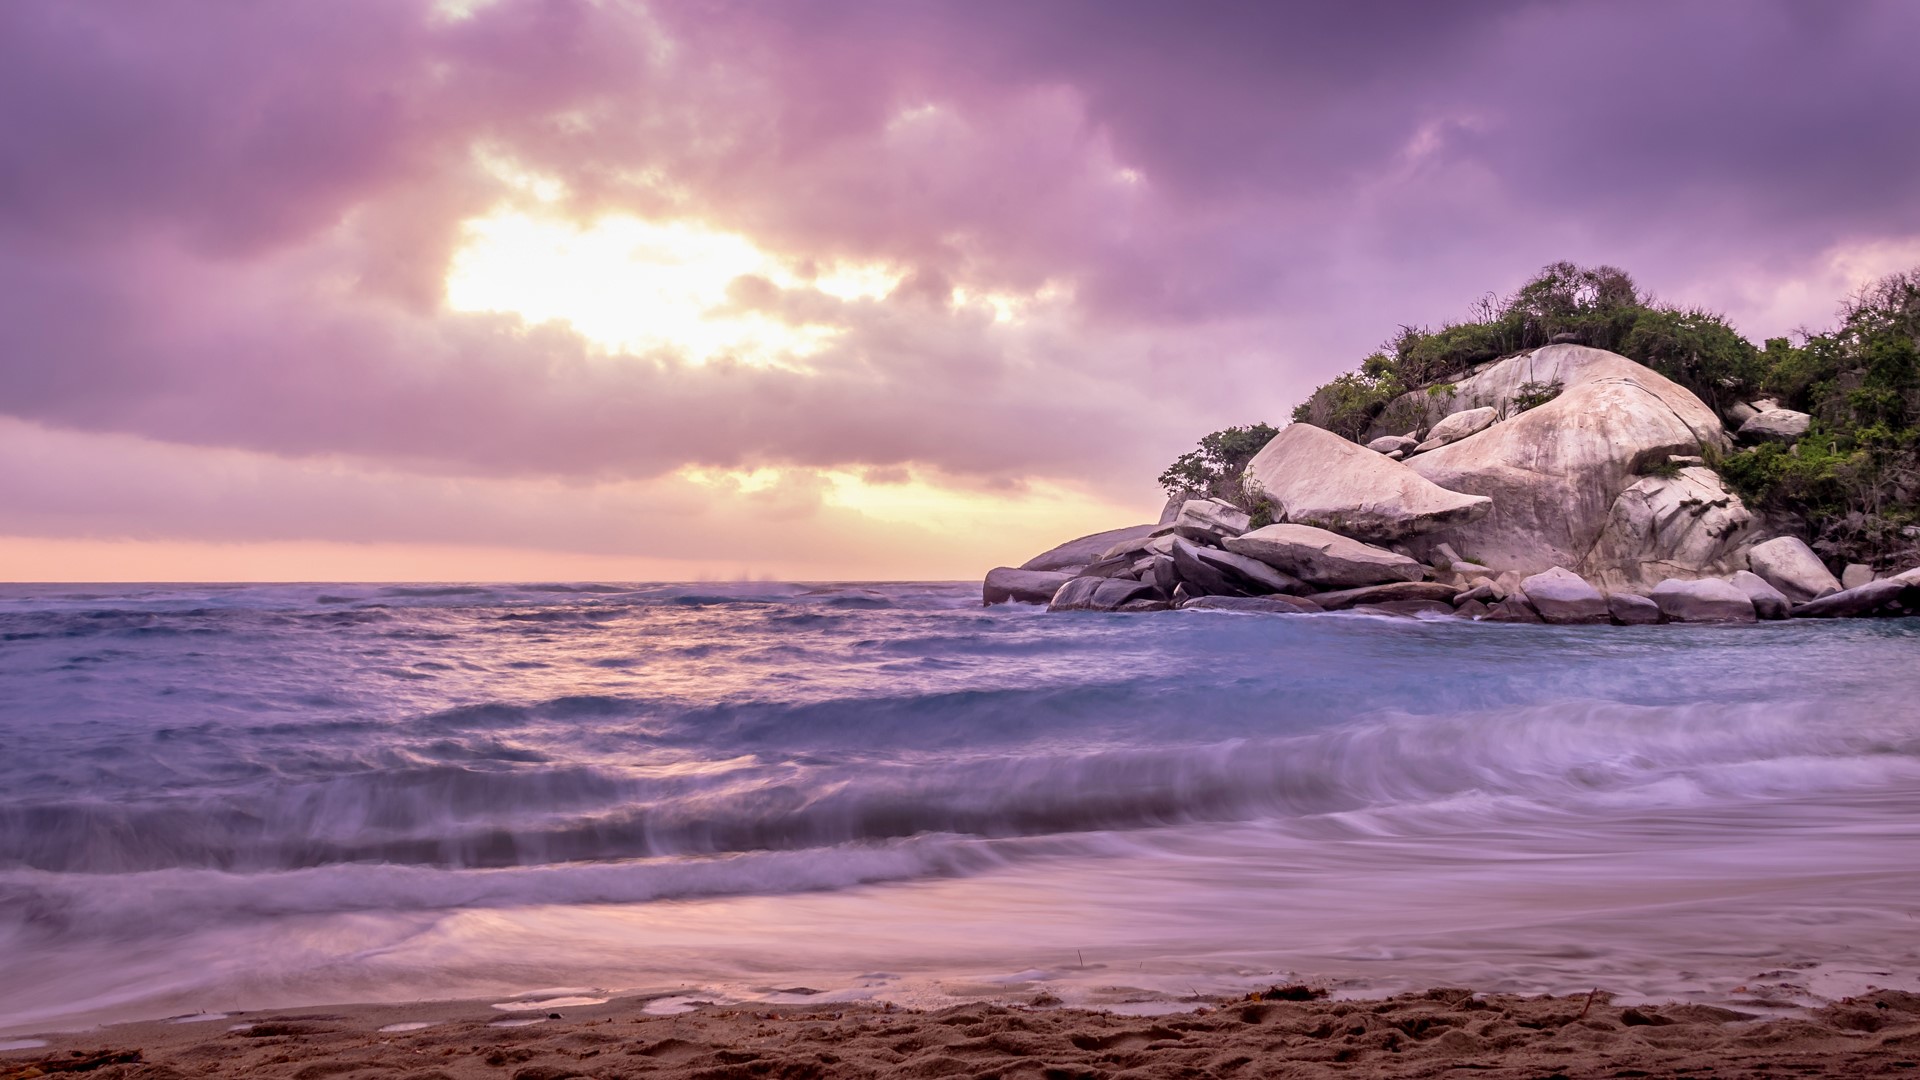 Landscape Nature Beach Rocks Trees Clouds Sky Waves Sand Long Exposure Horizon Sunset Colombia Water 1920x1080